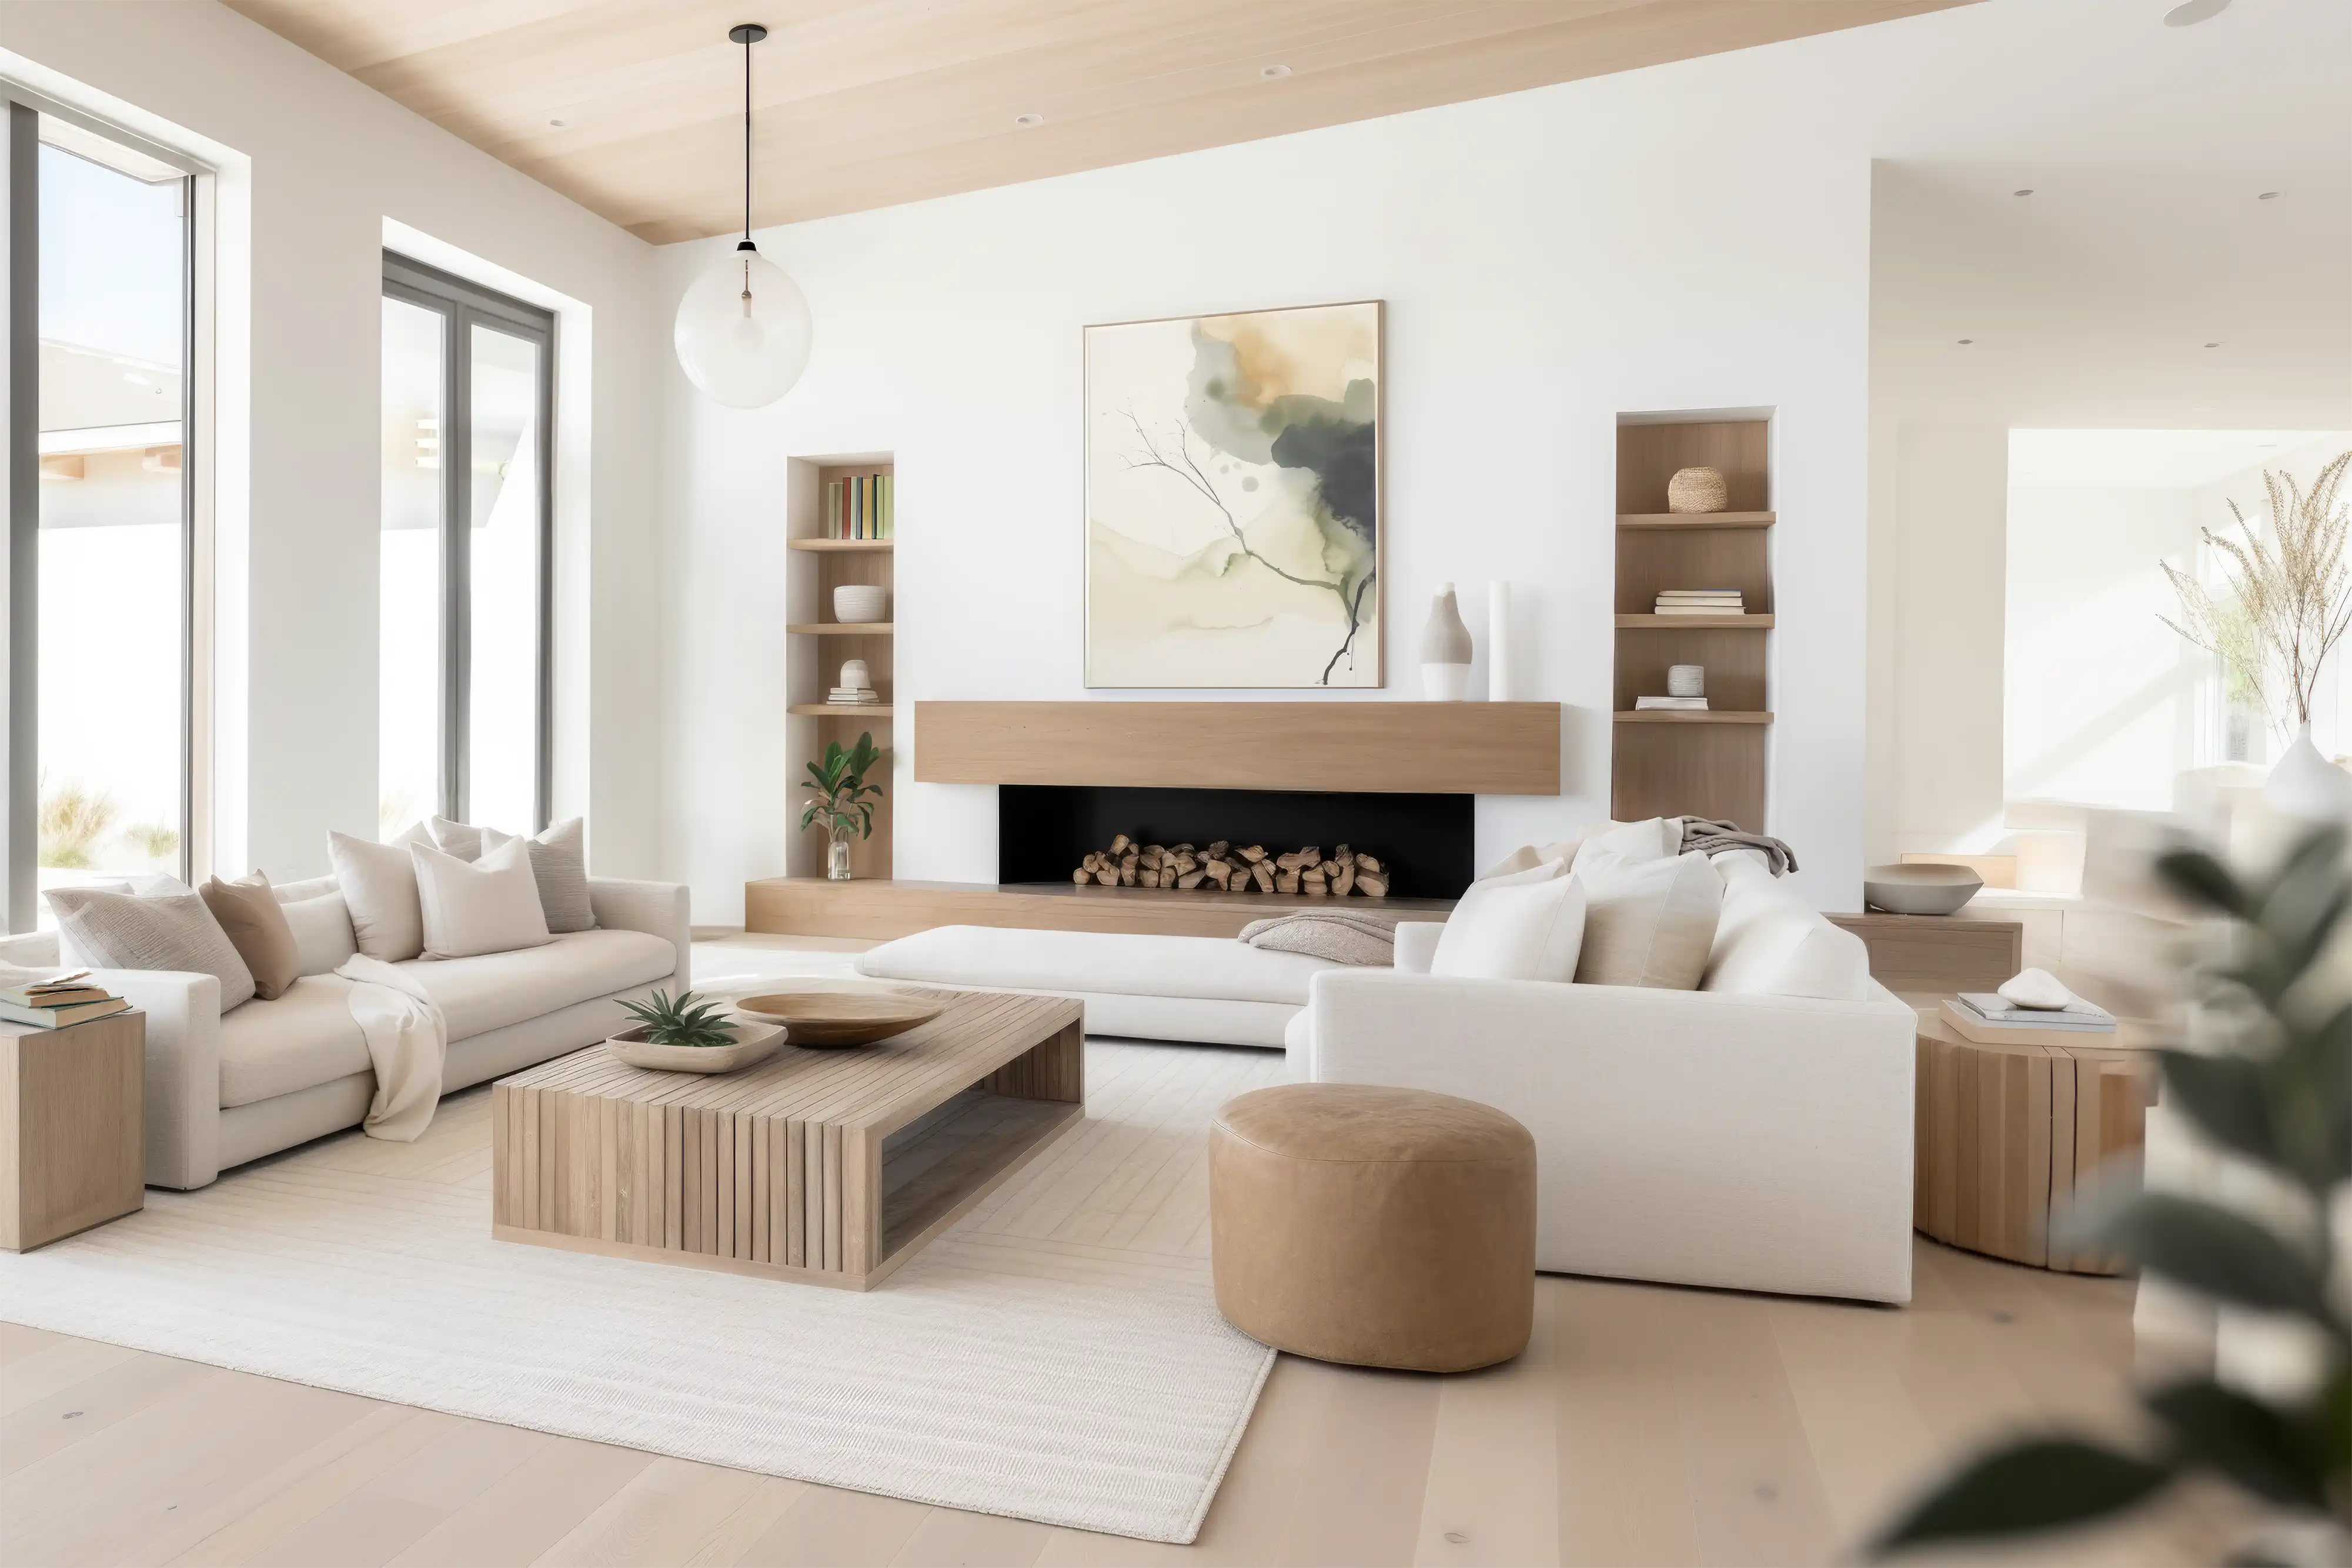 A modern living room with a fireplace, a window with a tree view and an abstract painting, interior by Sarah Brown Design